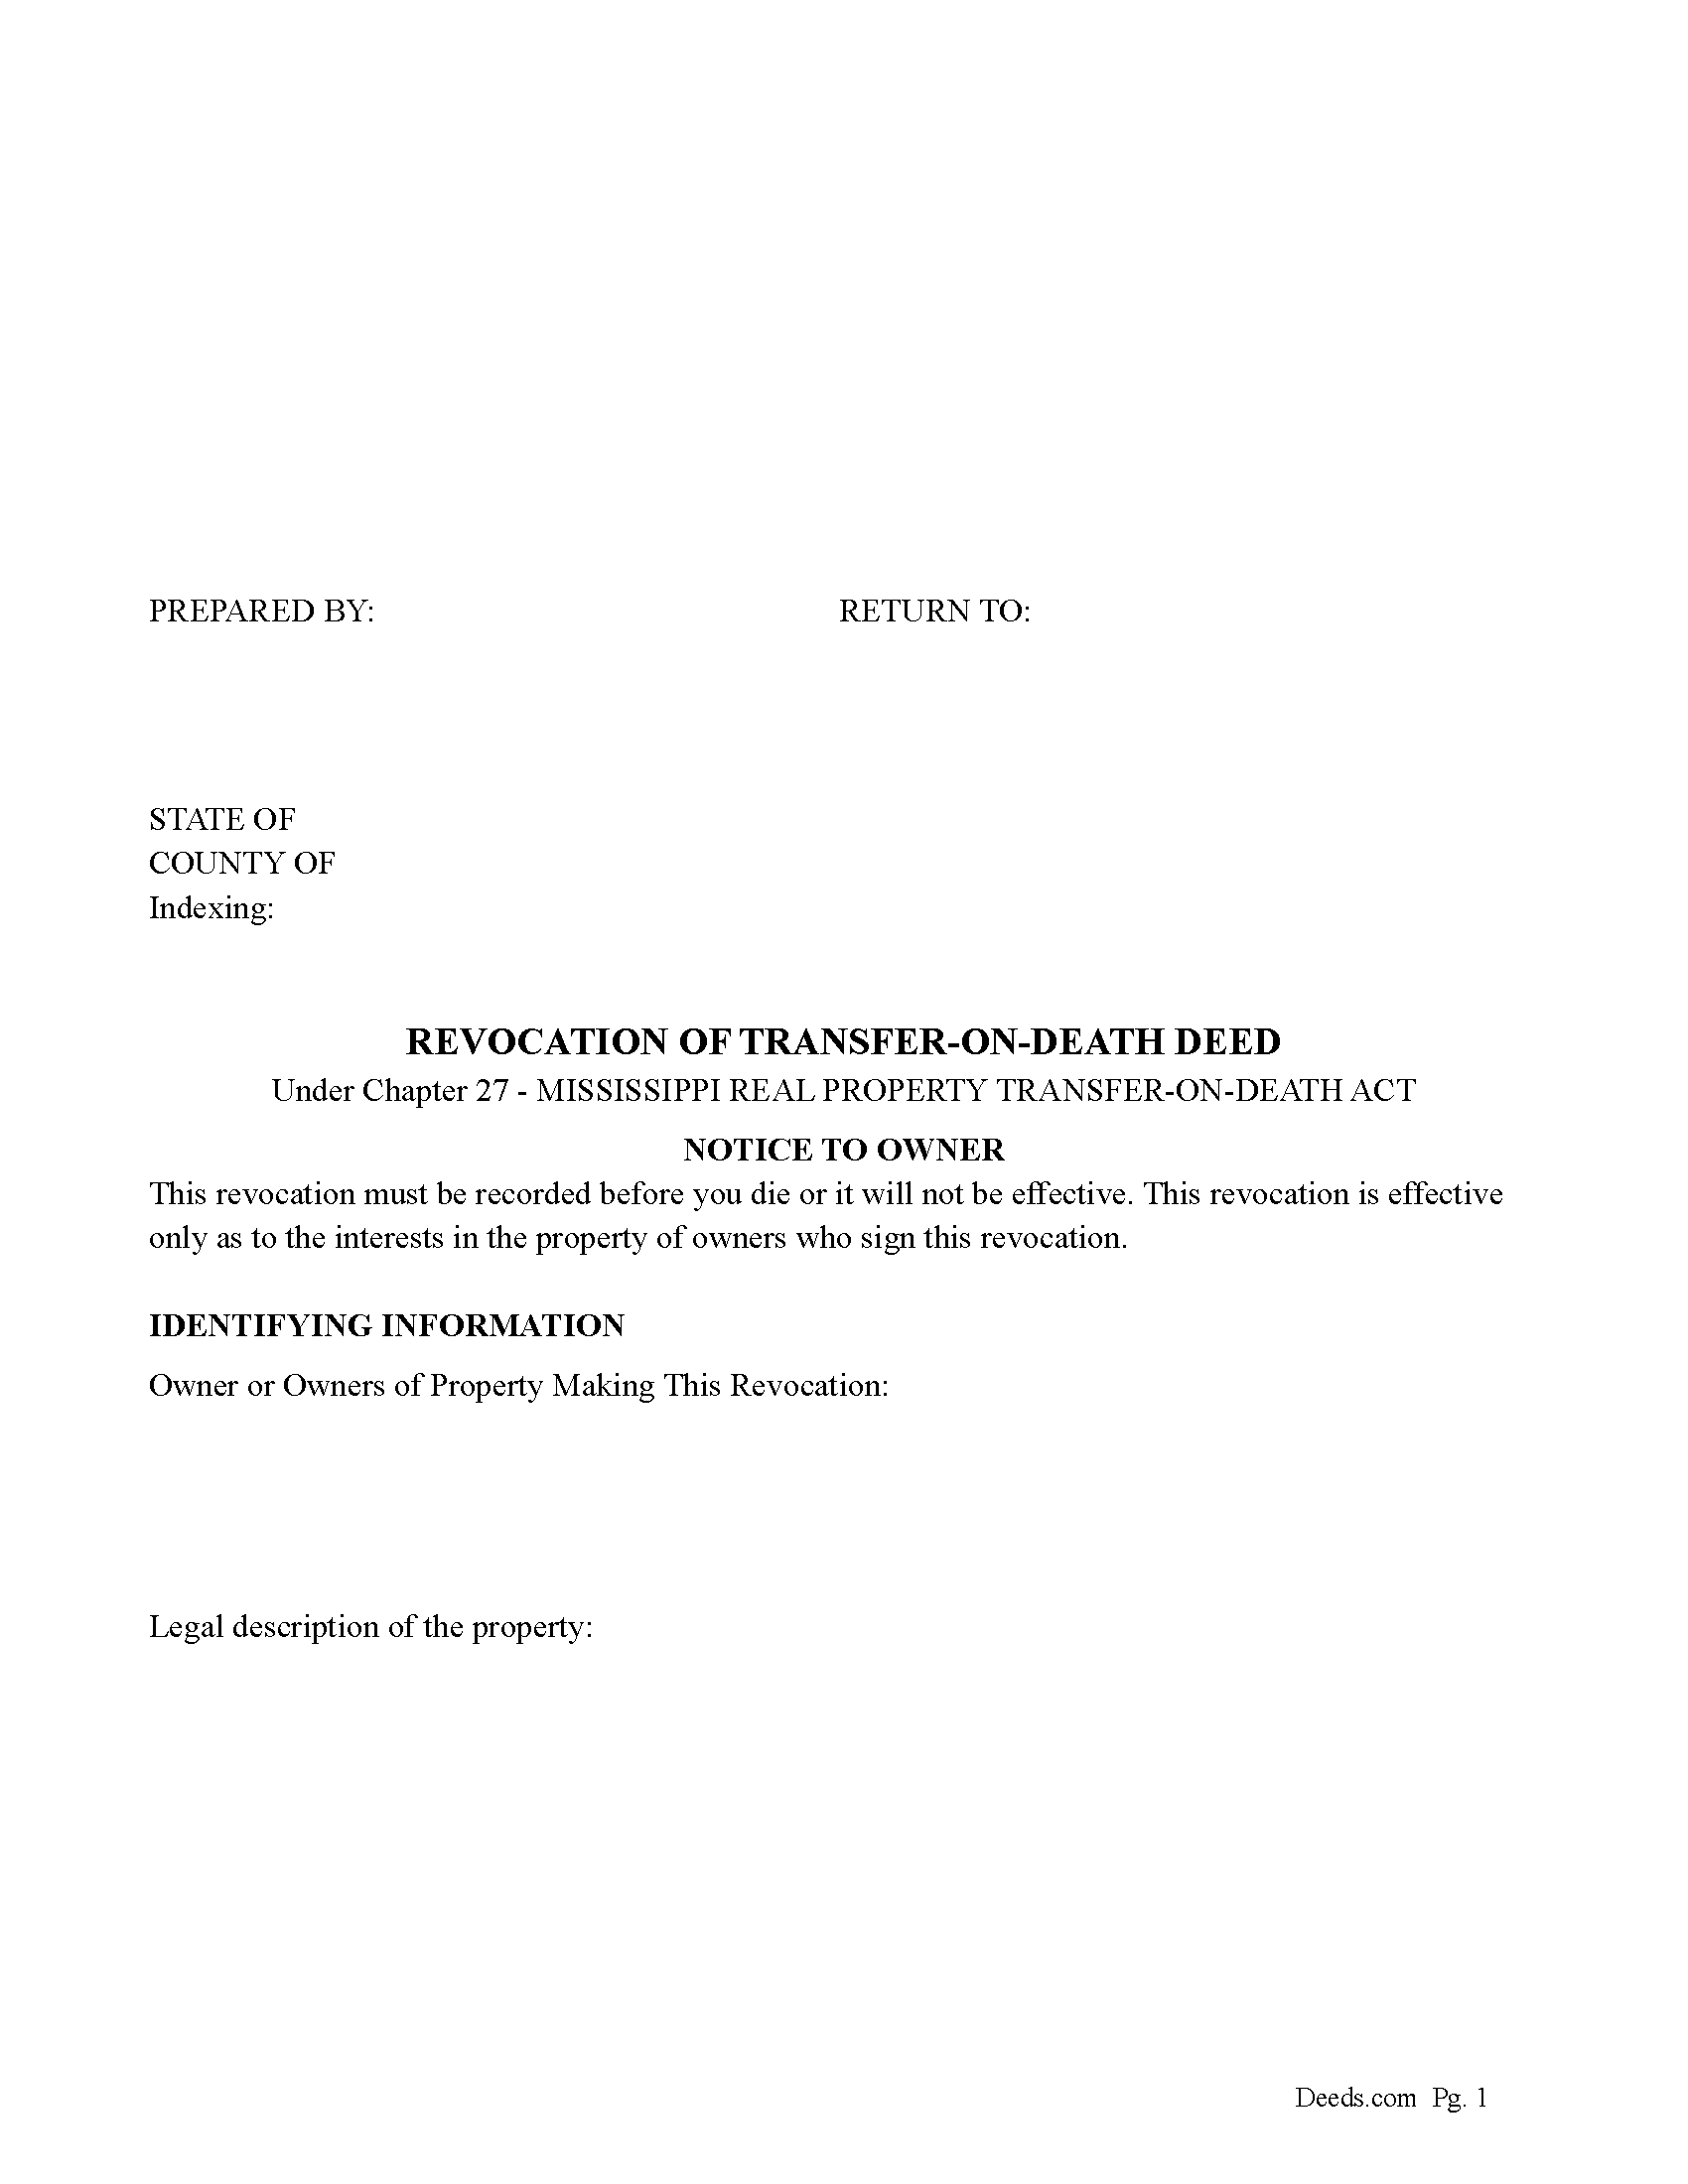 Revocation of Transfer on Death Deed